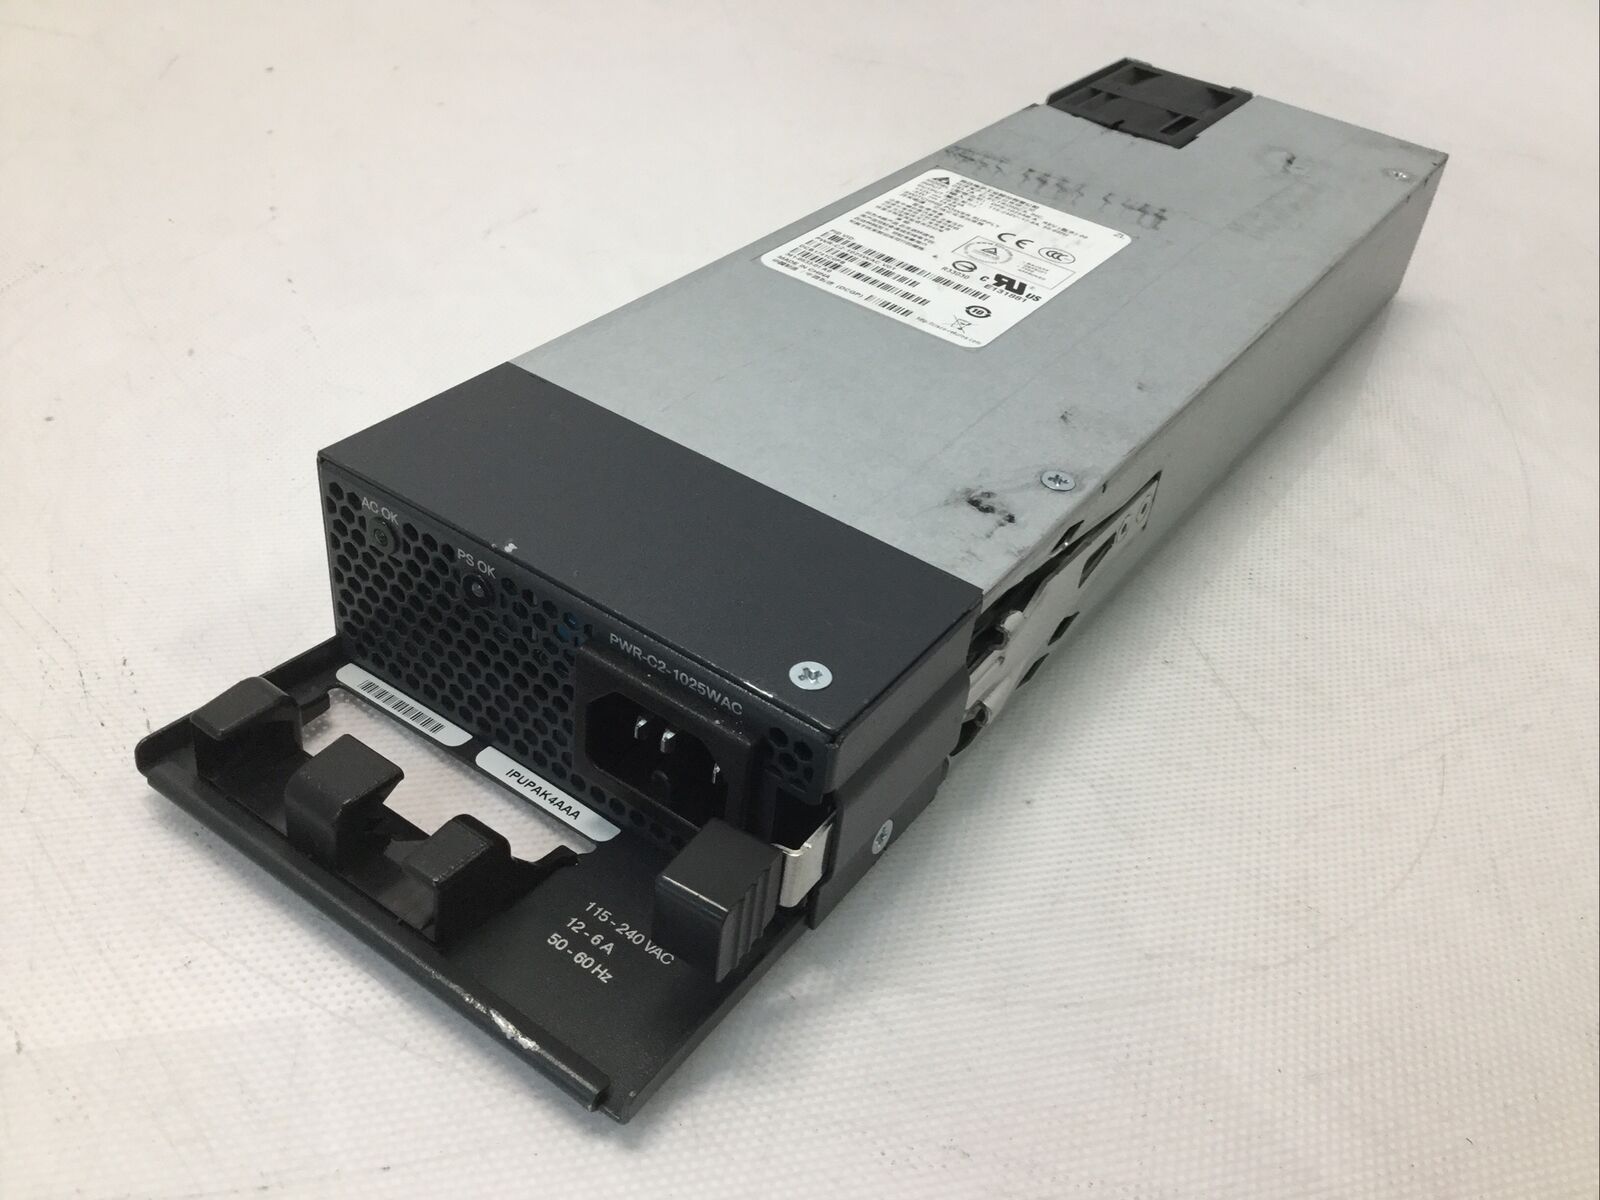 Cisco Catalyst 1025w Power Supply Pwr-c2-1025wac For 3650 2960xr Series Switch